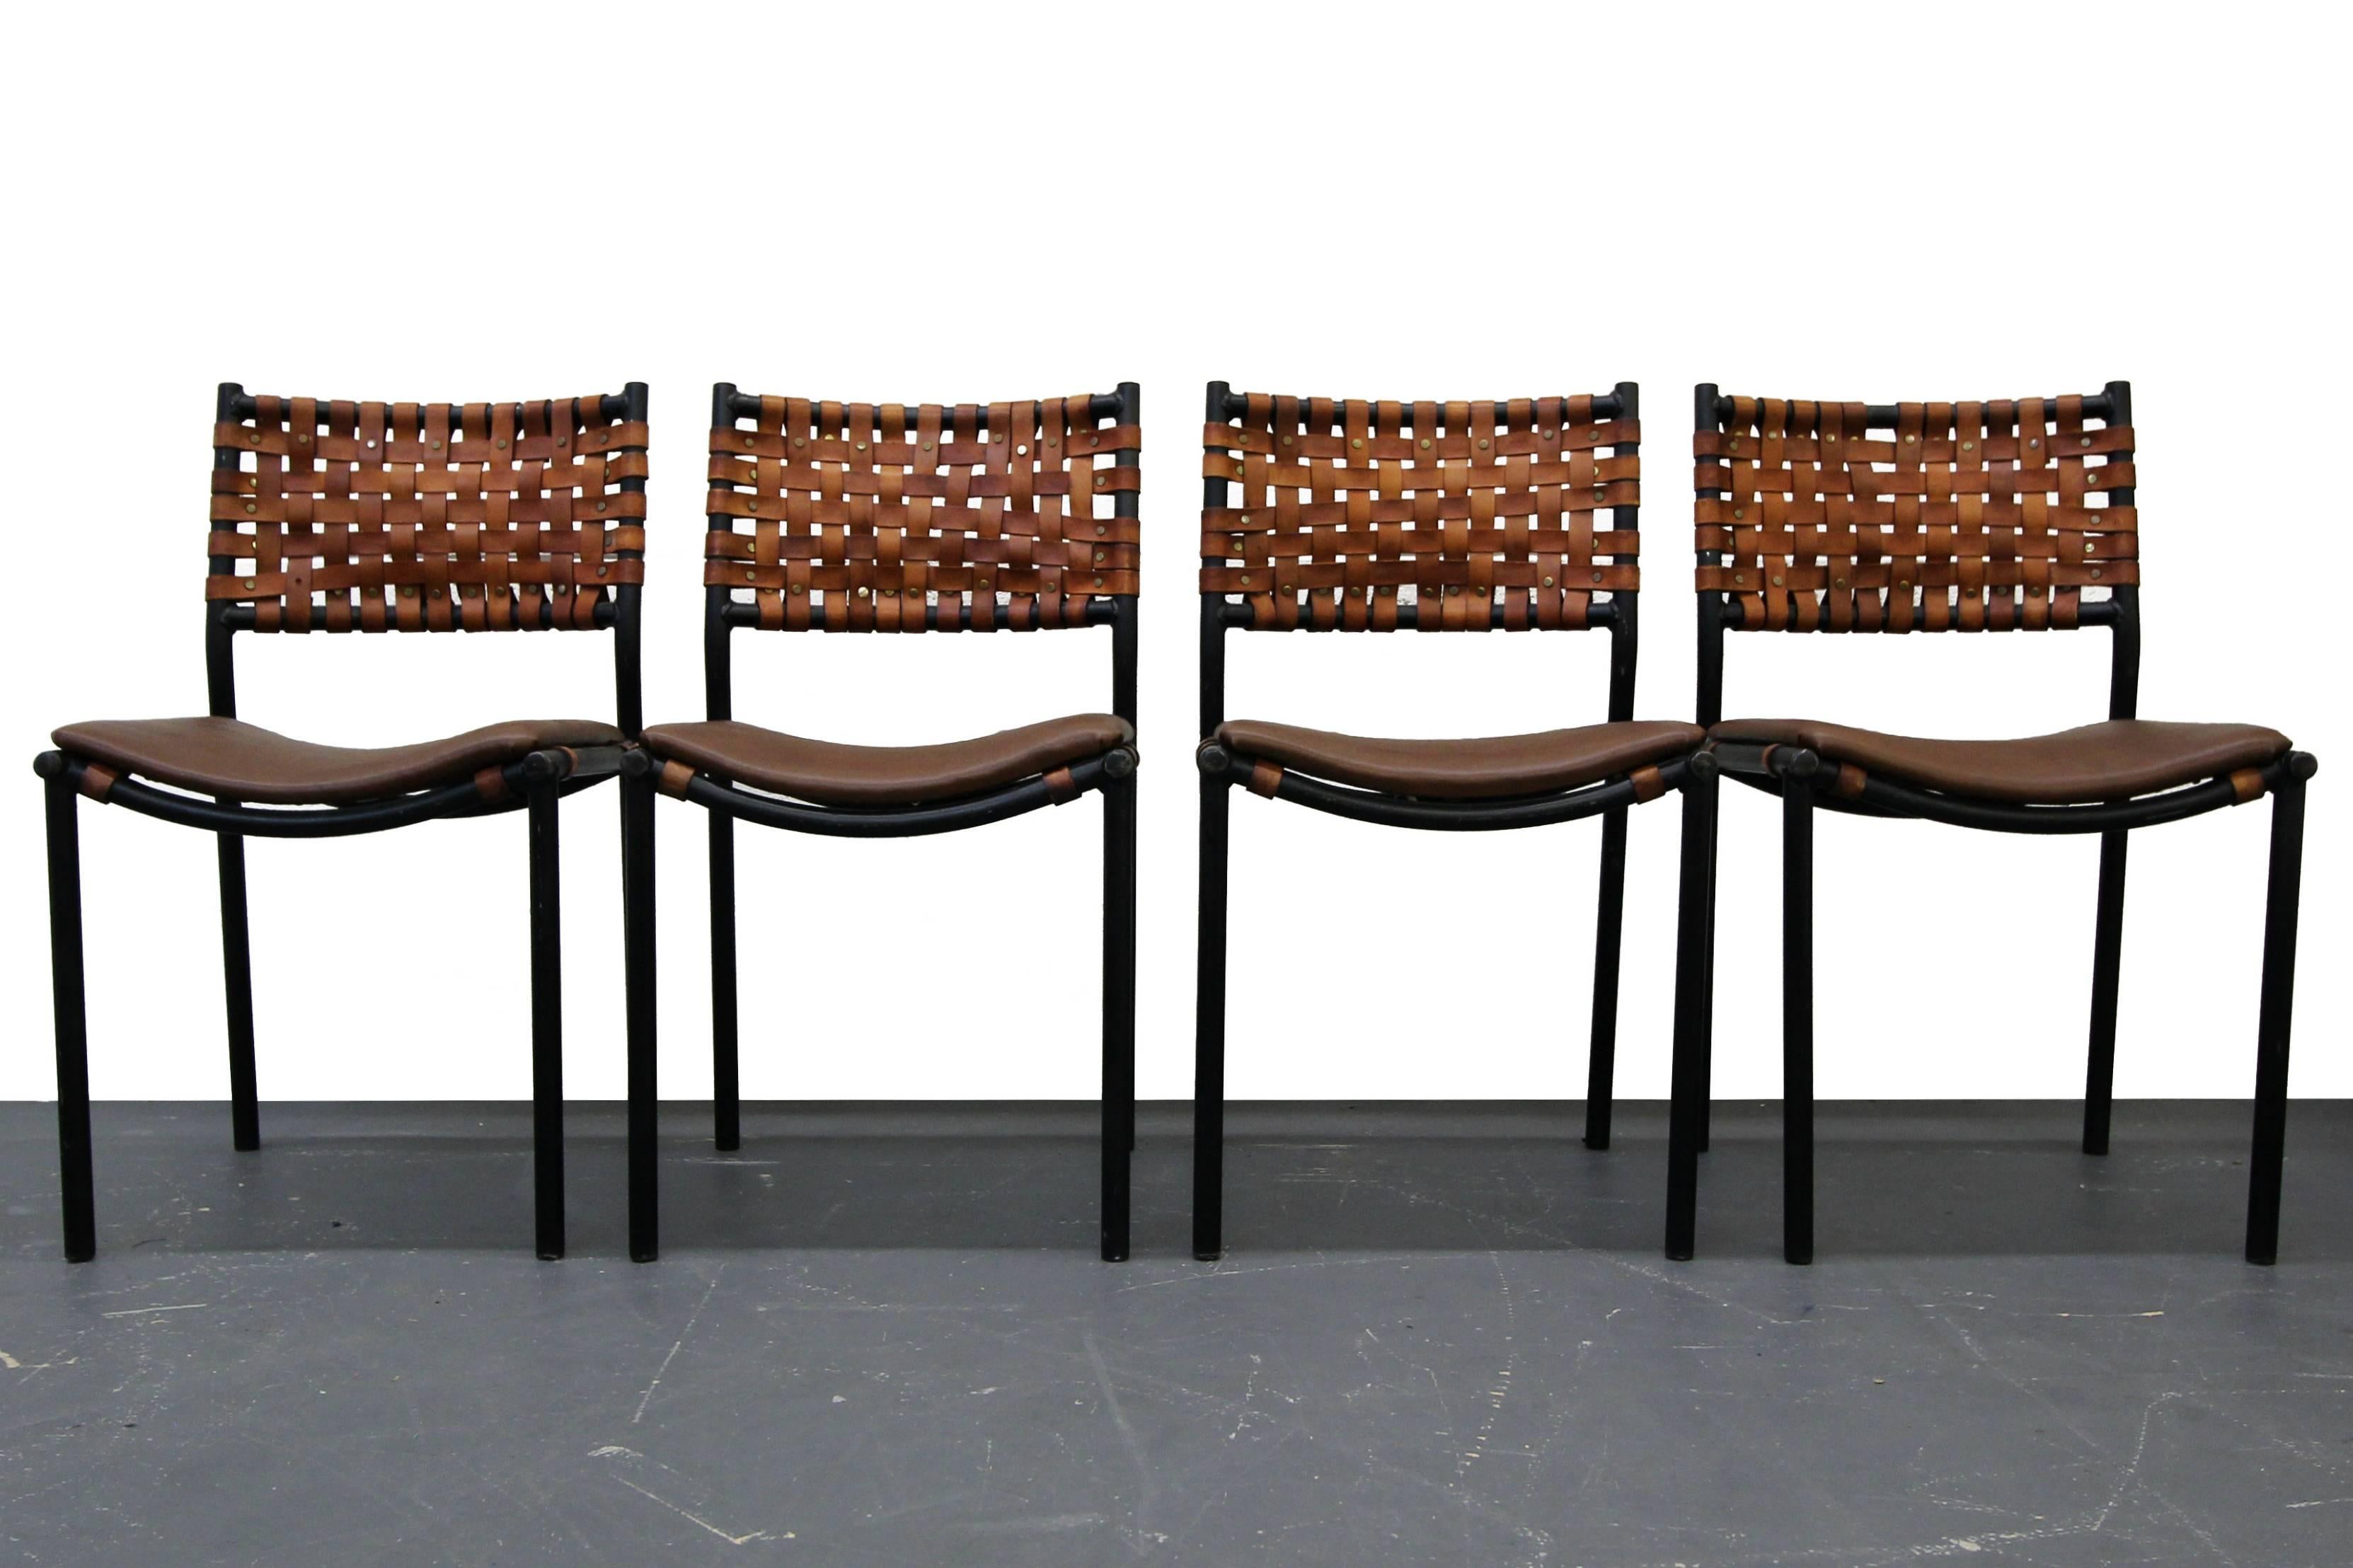 Set of four, perfectly patinaed, woven leather, dining or patio chairs by Arthur Umanoff for Shave Howard. Chairs have beautifully worn woven leather for that great Industrial look. 

The chairs are in beautiful worn Industrial condition. The